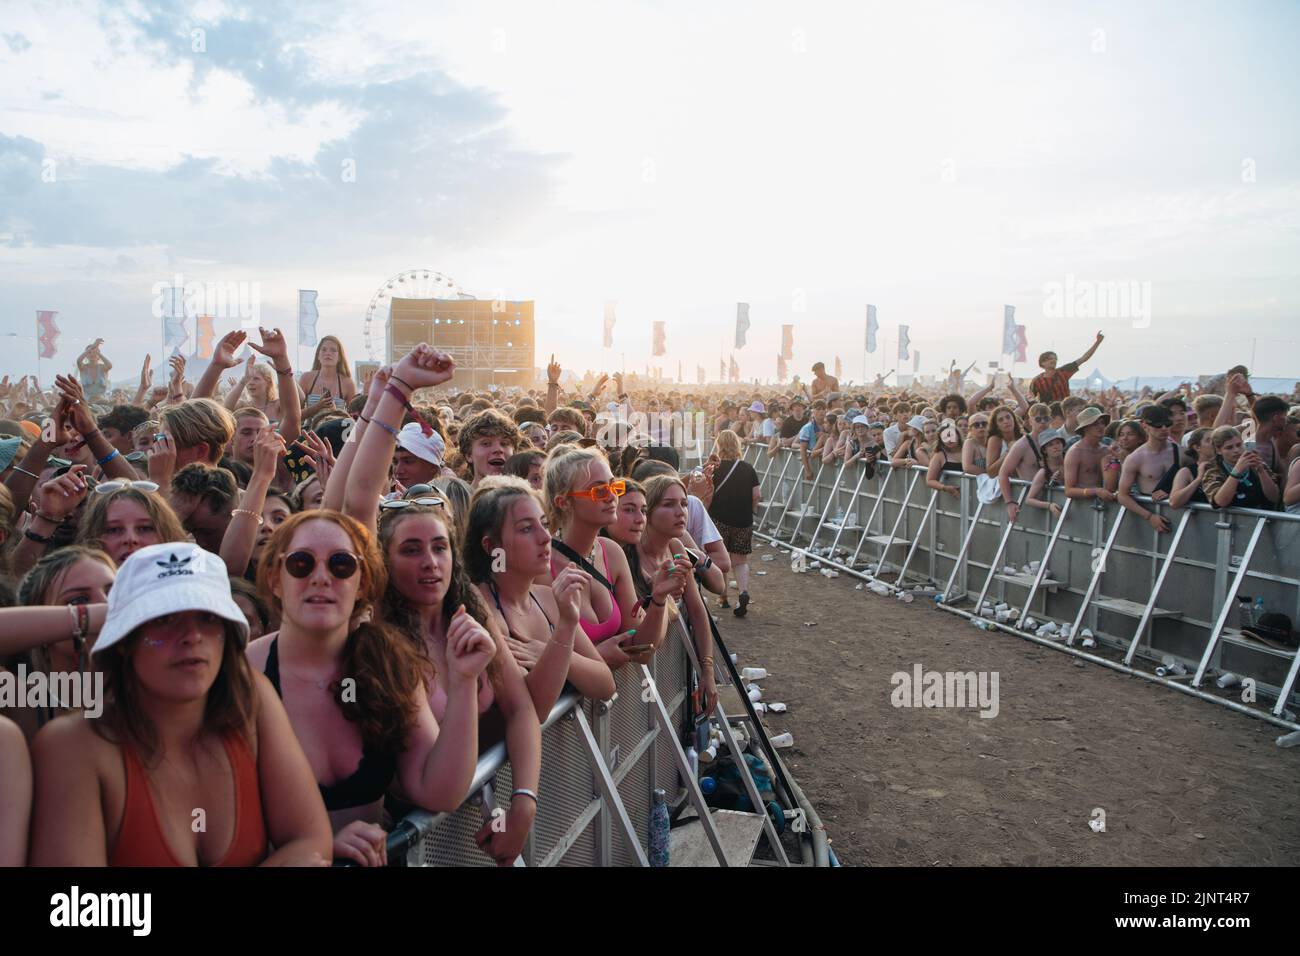 Newquay, Cornwall, UK. 13th August, 2022. Main stage crowd at Boardmasters Festival 2022. Credit: Sam Hardwick/Alamy. Stock Photo